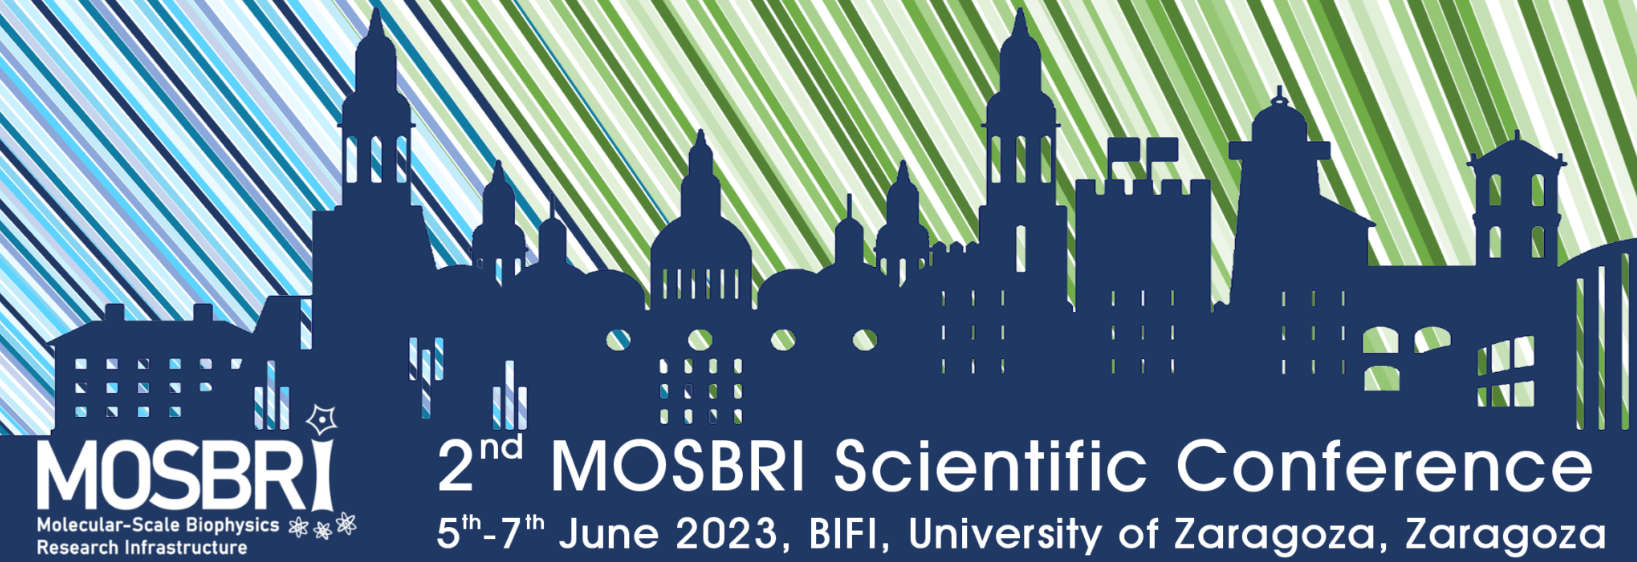 XtalConcepts will be at the MOSBRI Scientific Conference